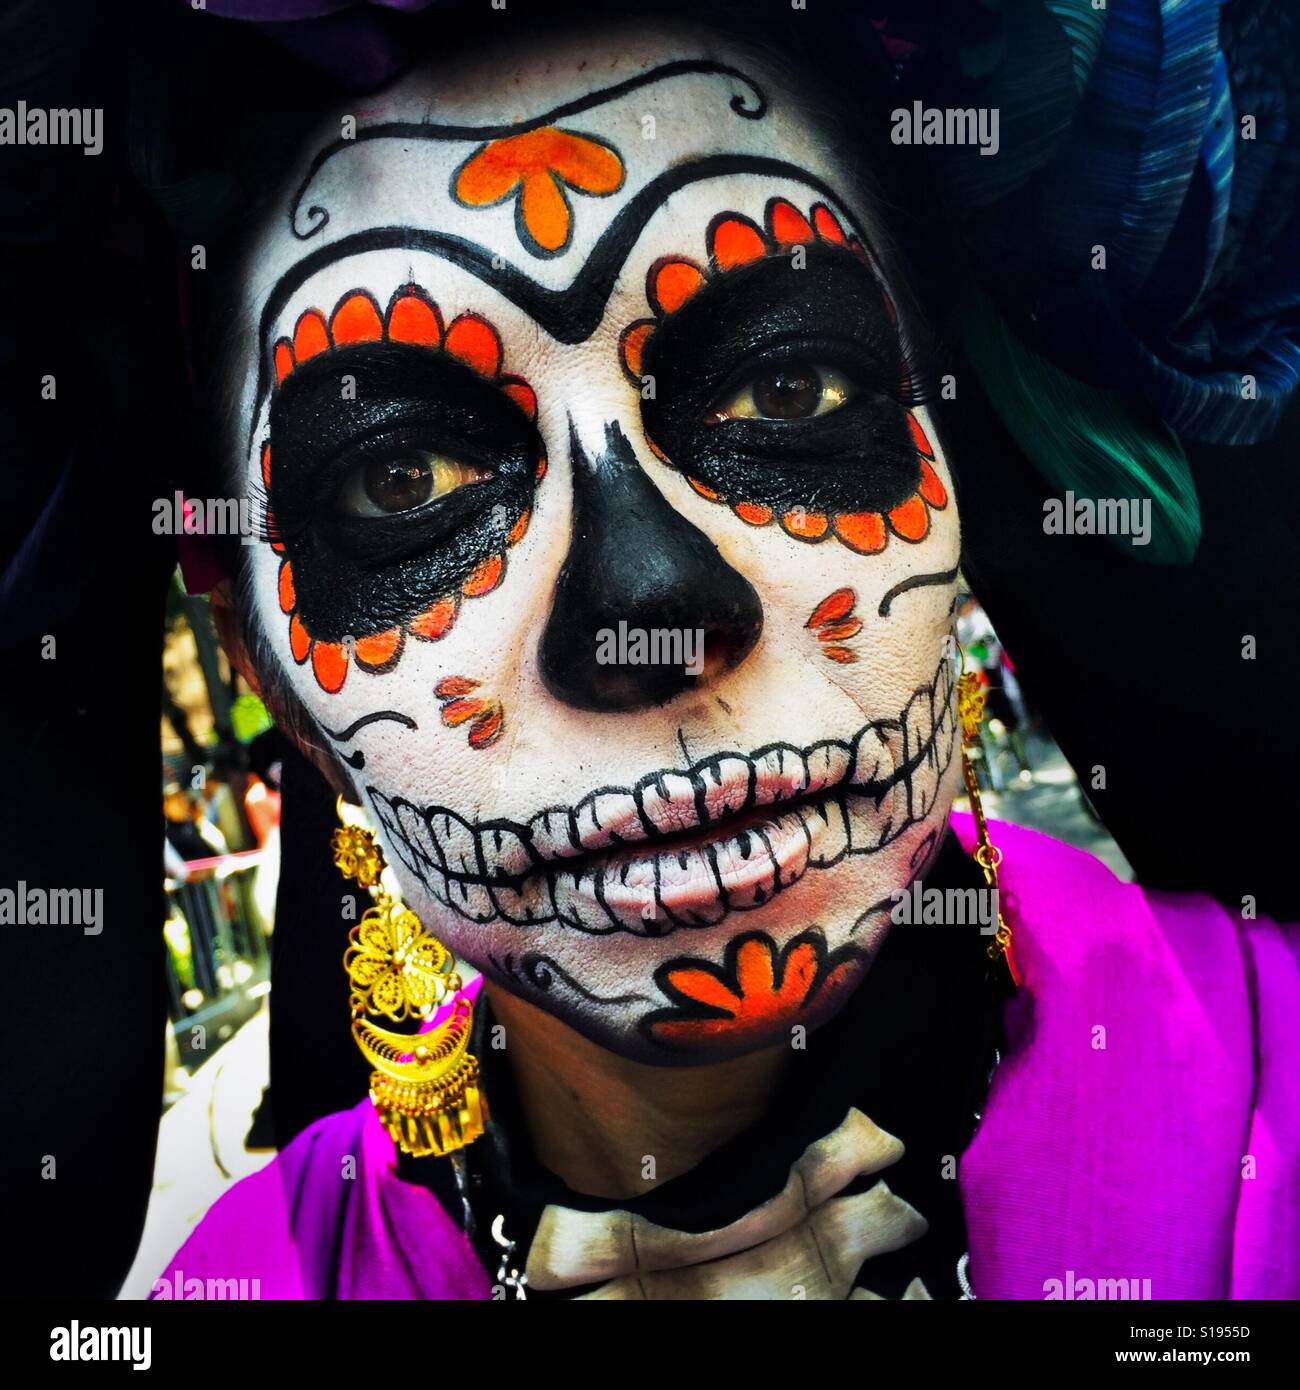 A young girl, representing a Mexican cultural icon called La Catrina, takes a part in celebrations of the Day of the Dead (Día de Muertos) in Mexico City, Mexico, 29 October 2016. Stock Photo